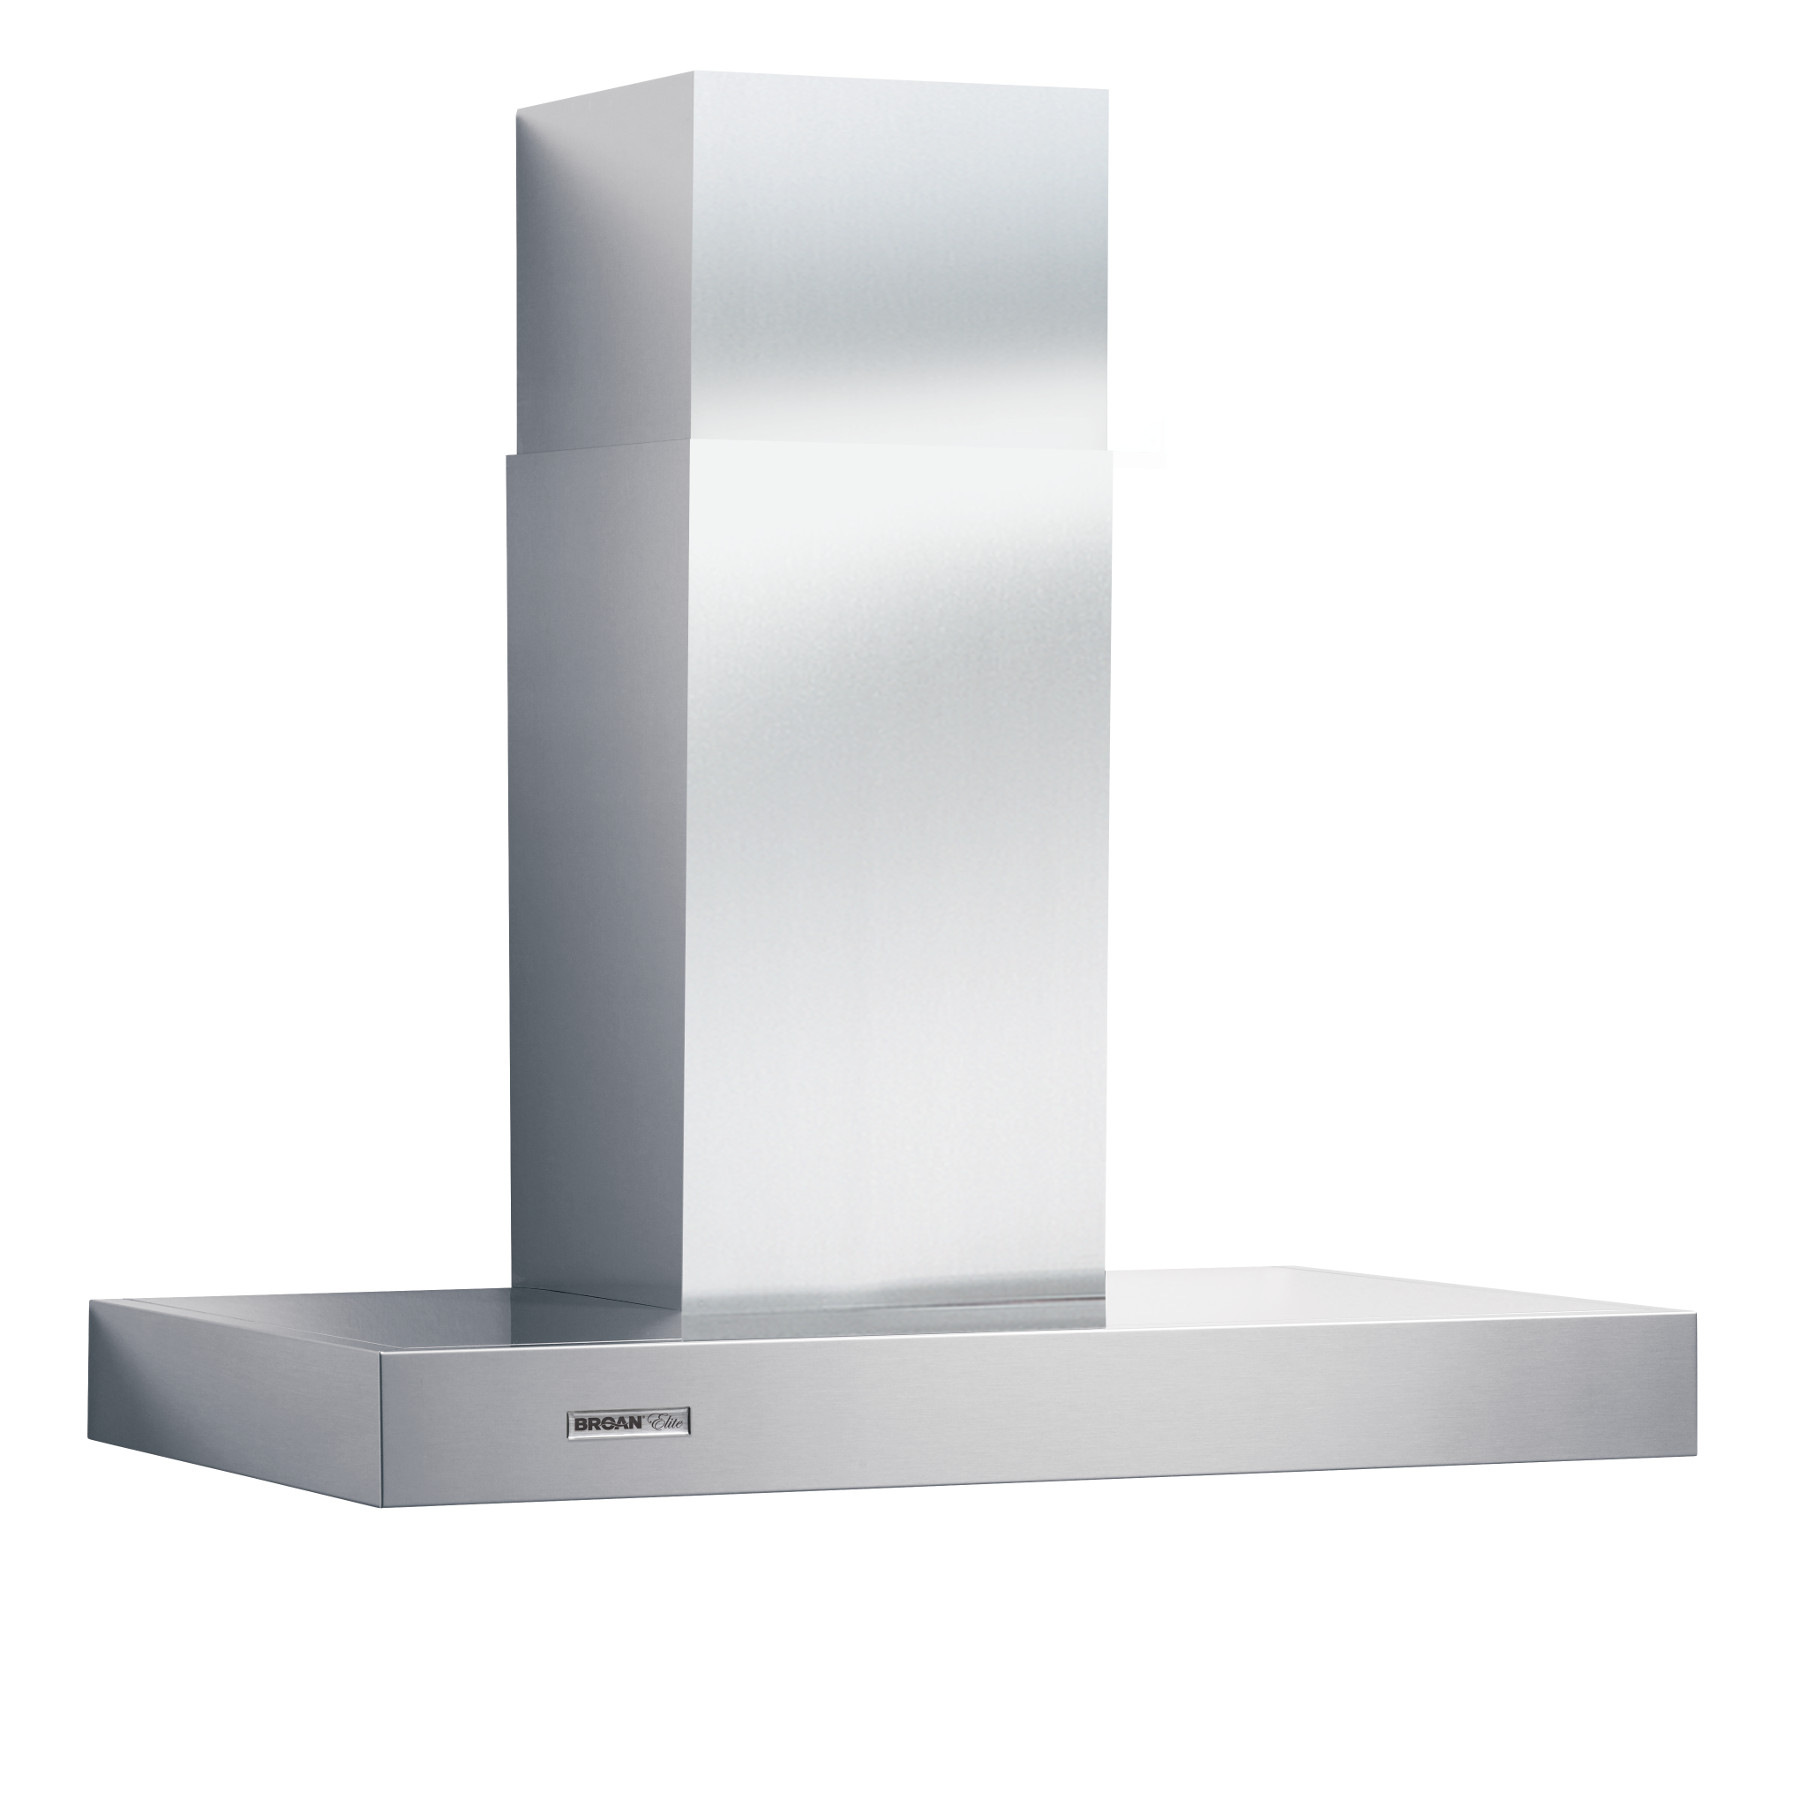 DISCONTINUED-Broan® 30-Inch Convertible Wall-Mount Chimney Range Hood w/ Heat Sentry™, 370 CFM, Stainless Steel